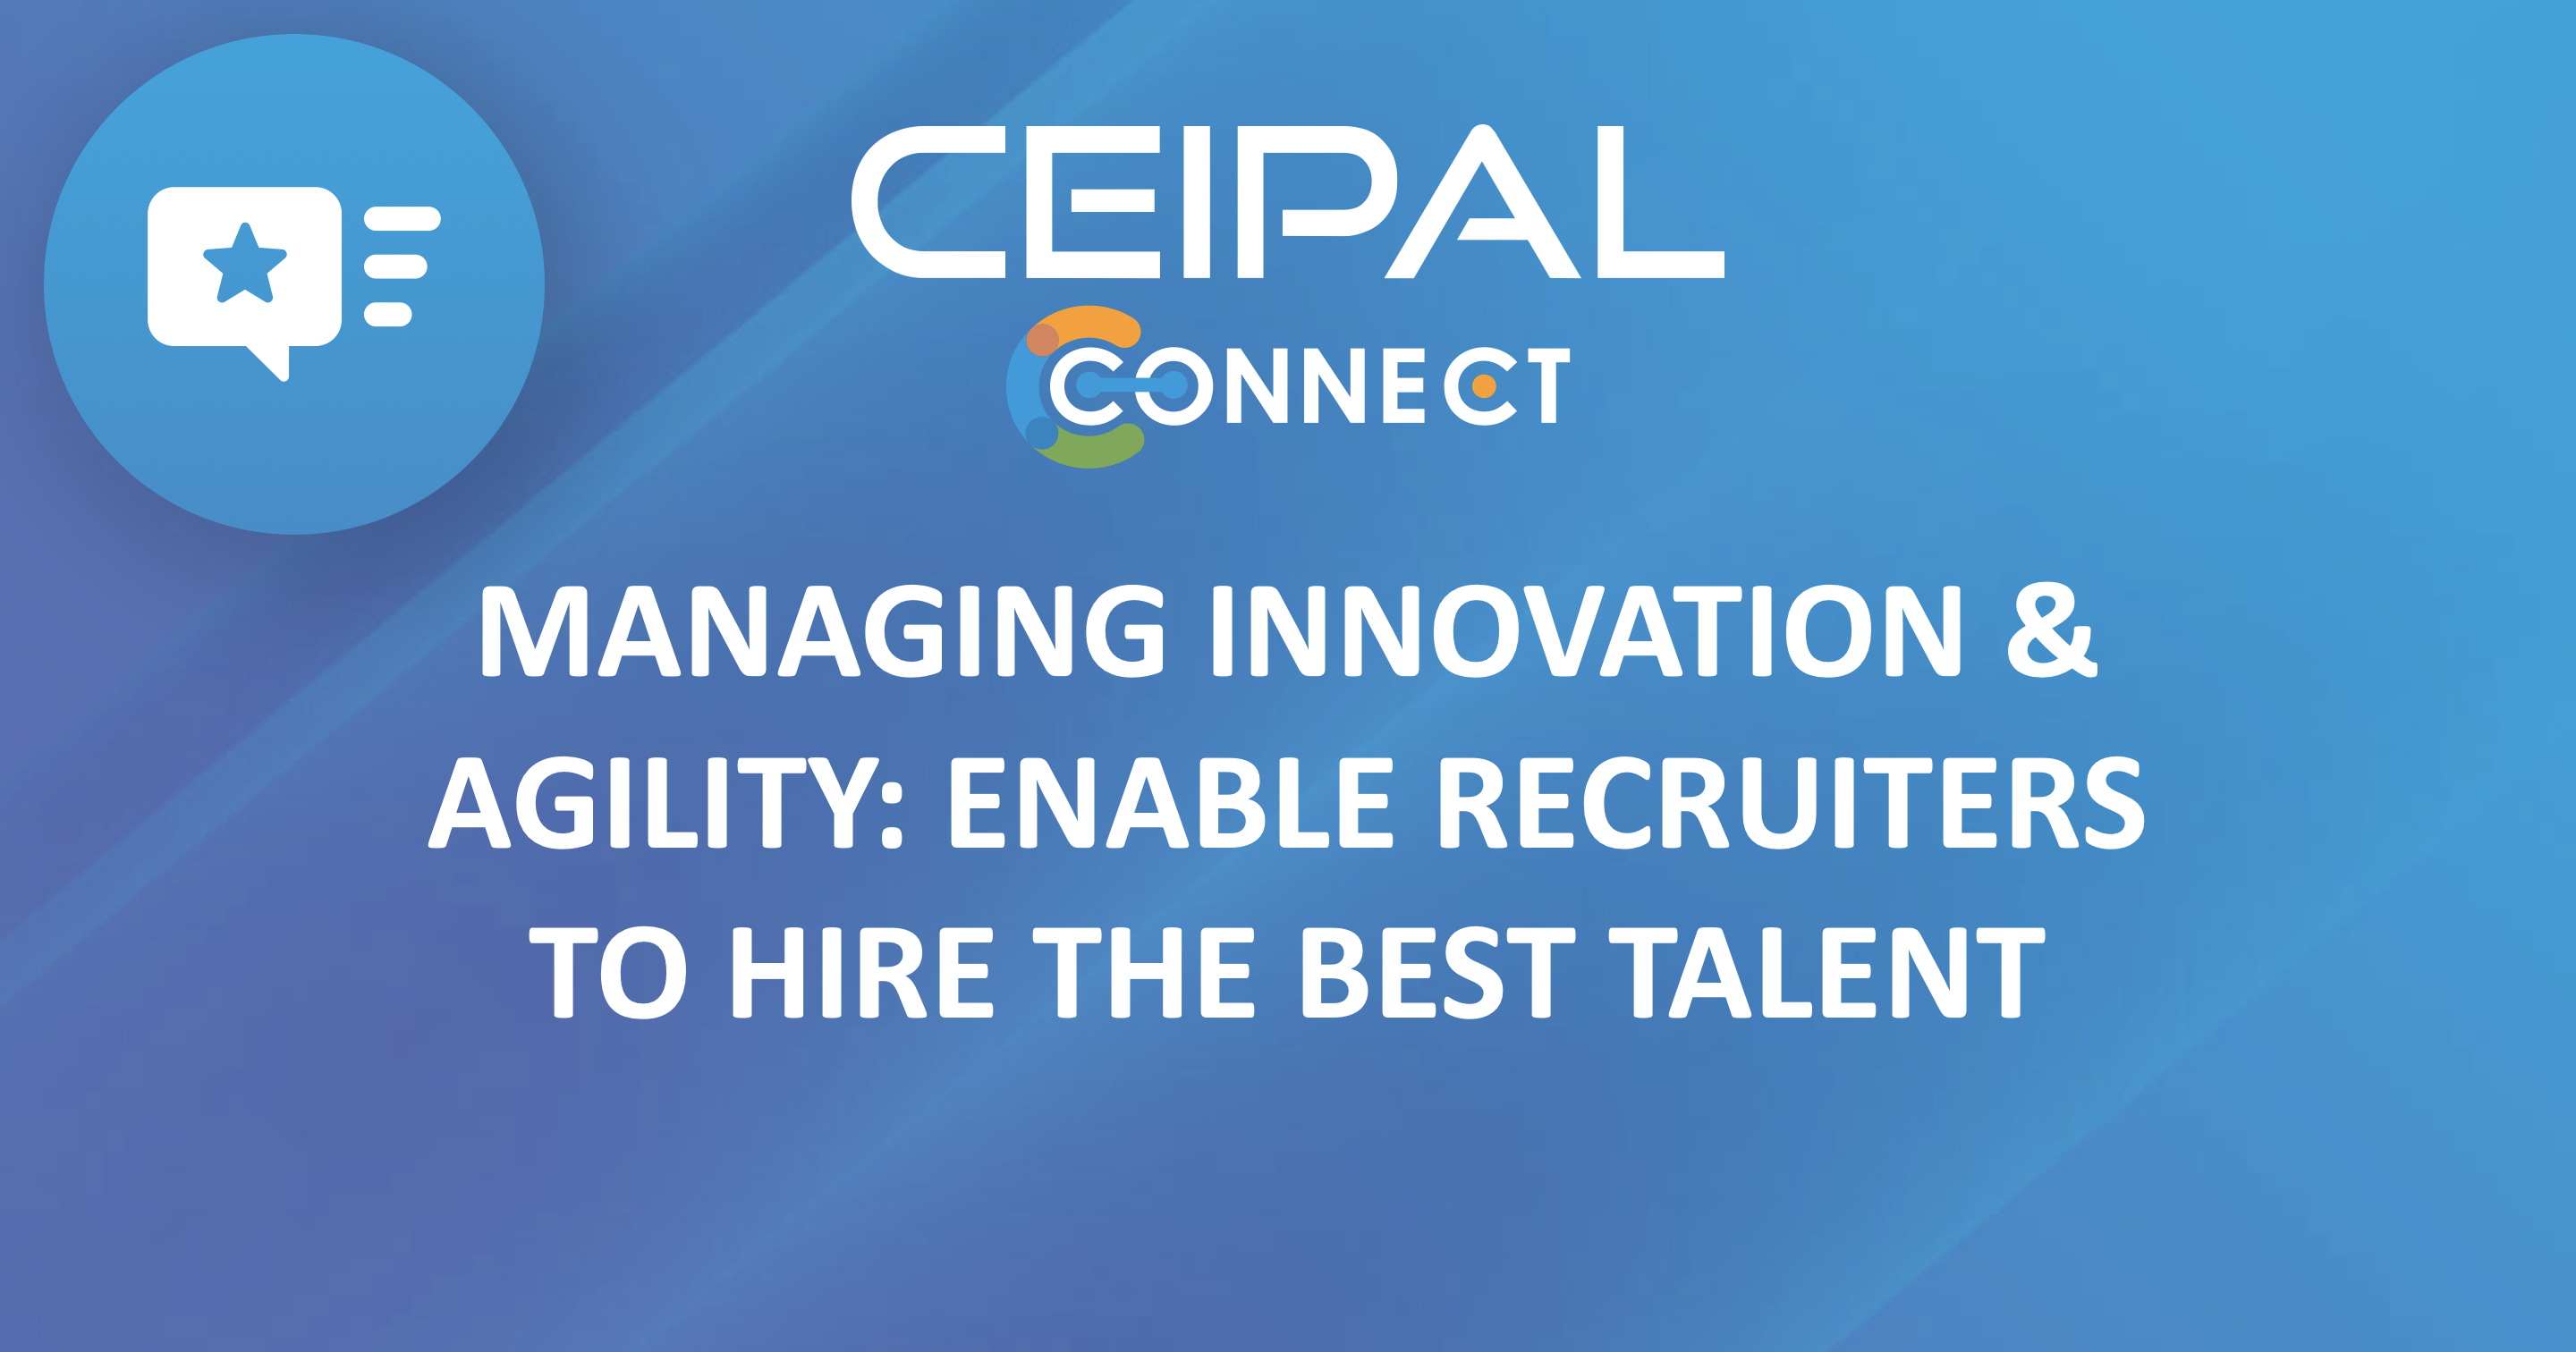 Managing Innovation & Agility: Enable Recruiters To Hire the Best Talent